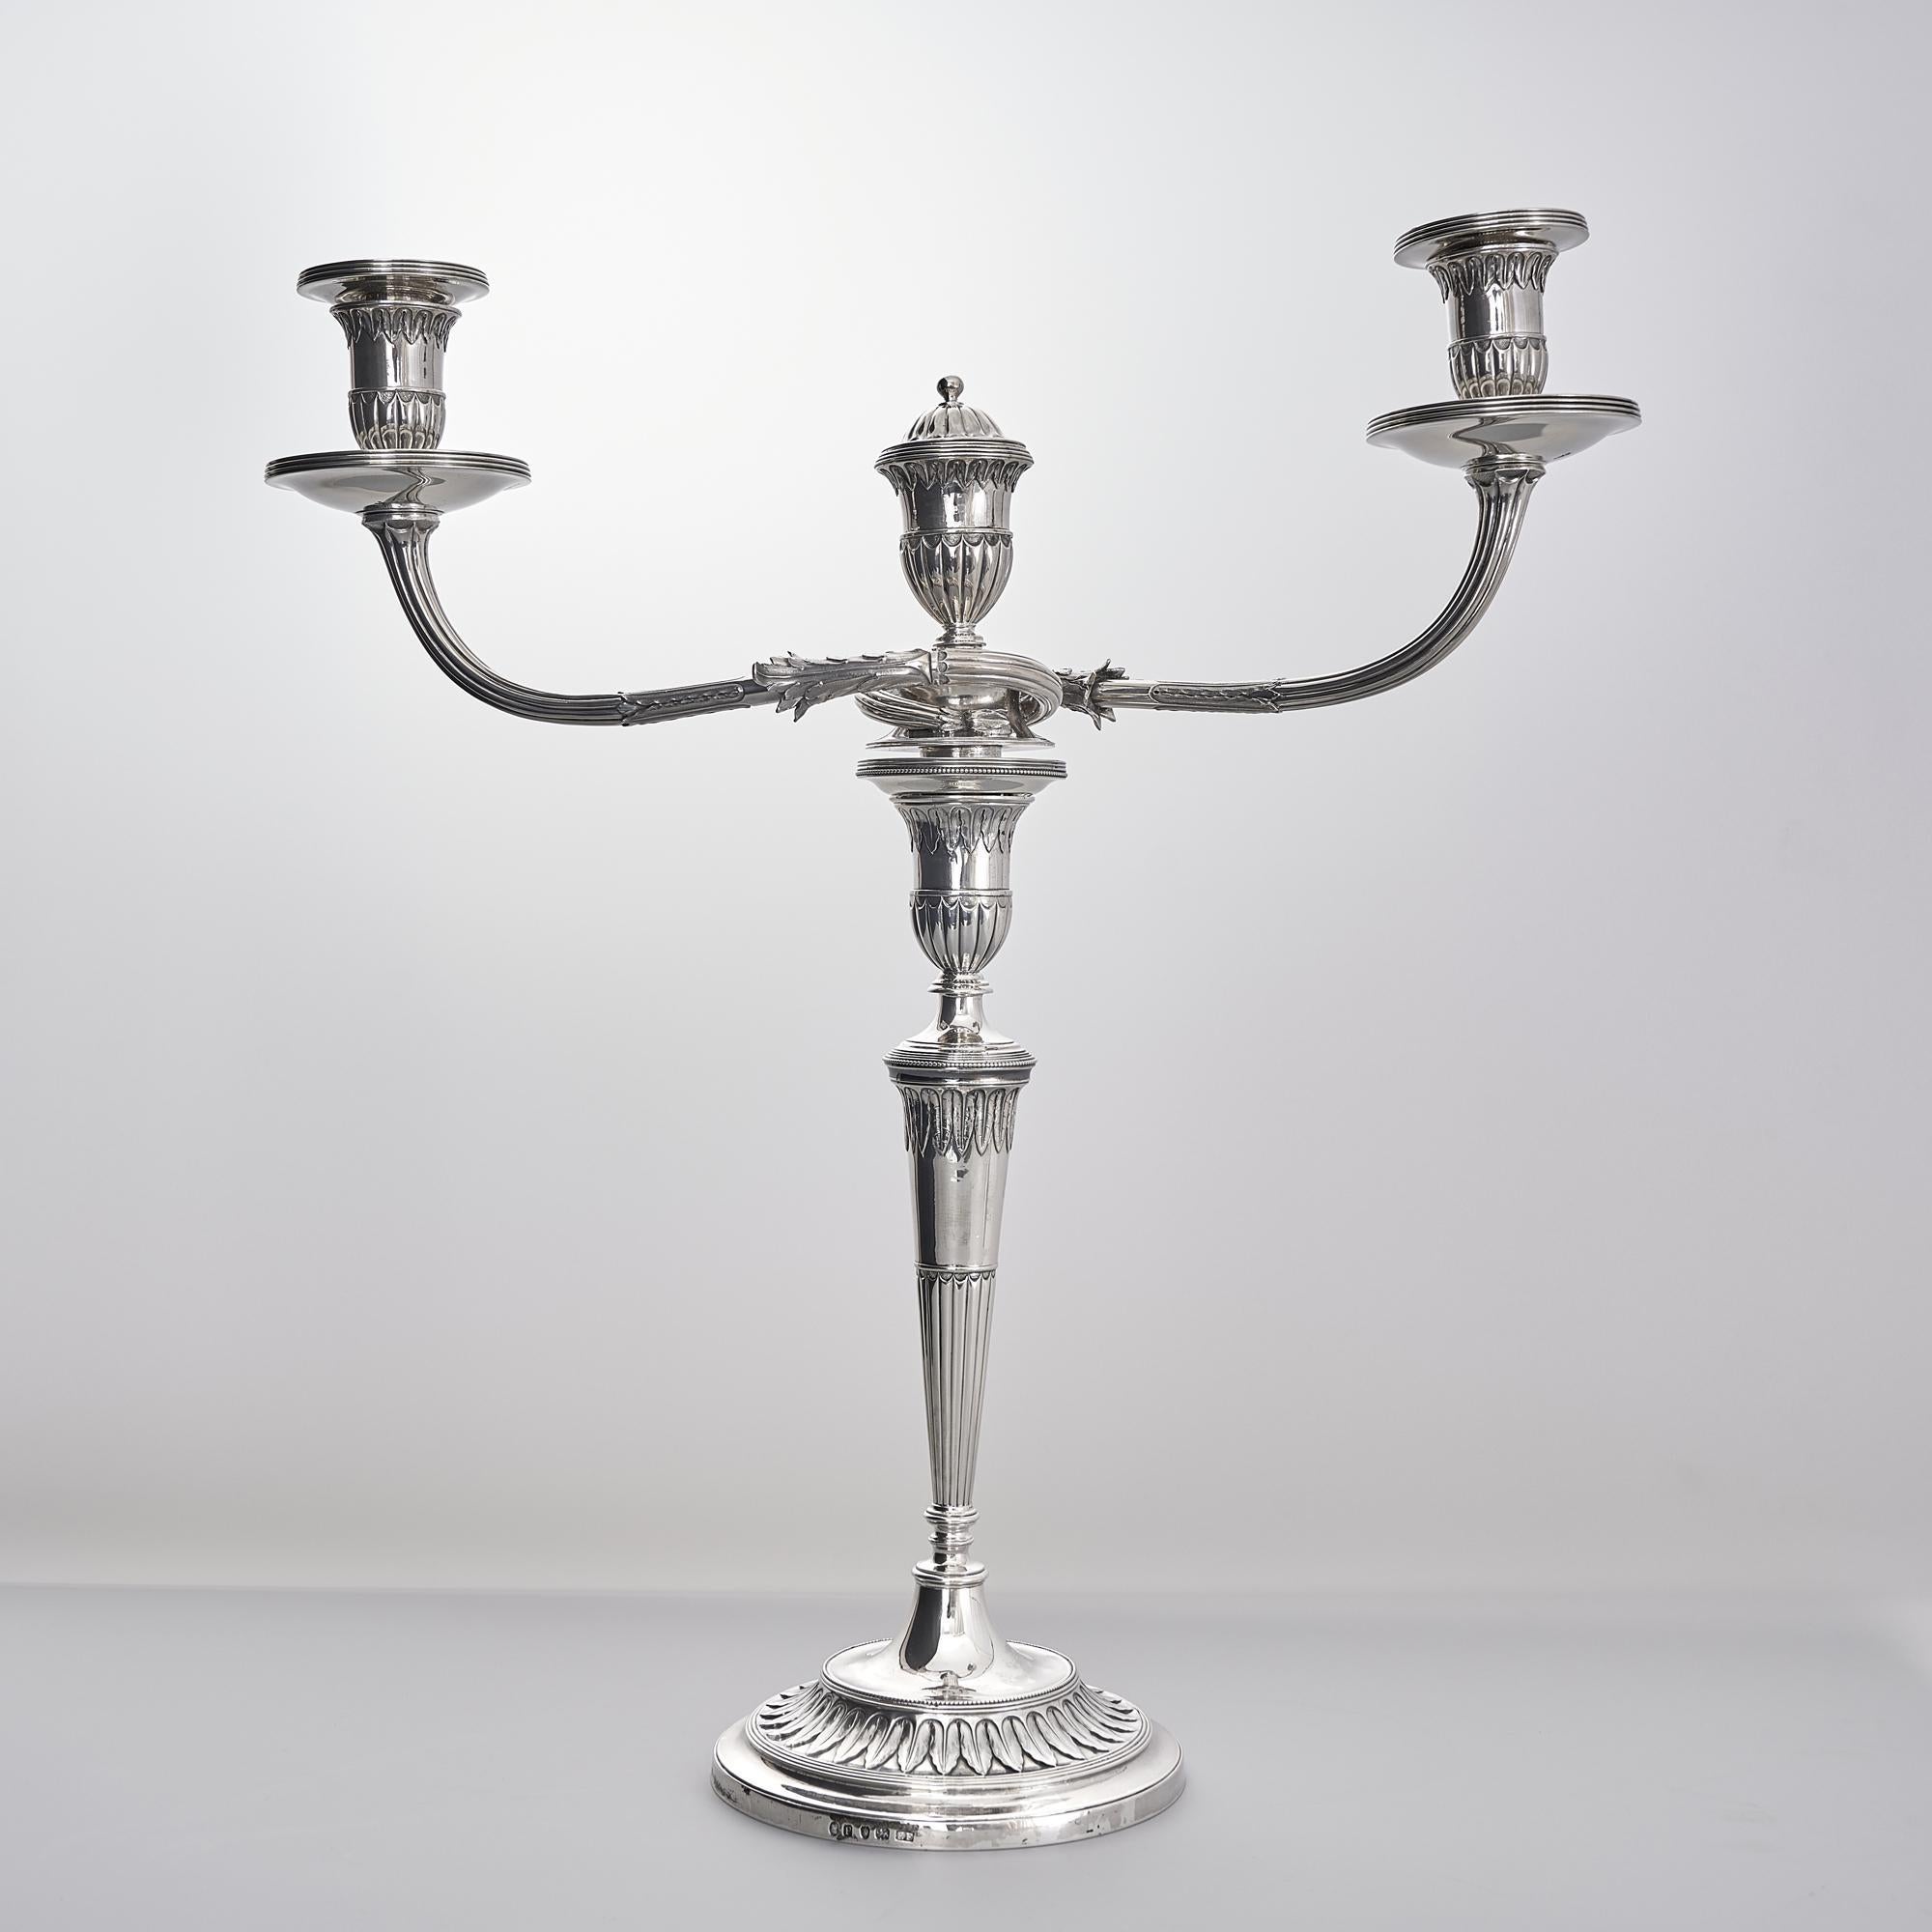 Suite of round-based George III silver candlesticks and candelabra with tapering stems and three-light arms made to the highest quality.  As a particularly attractive set in the neoclassical style of the mid 18th century, this suite incorporates two